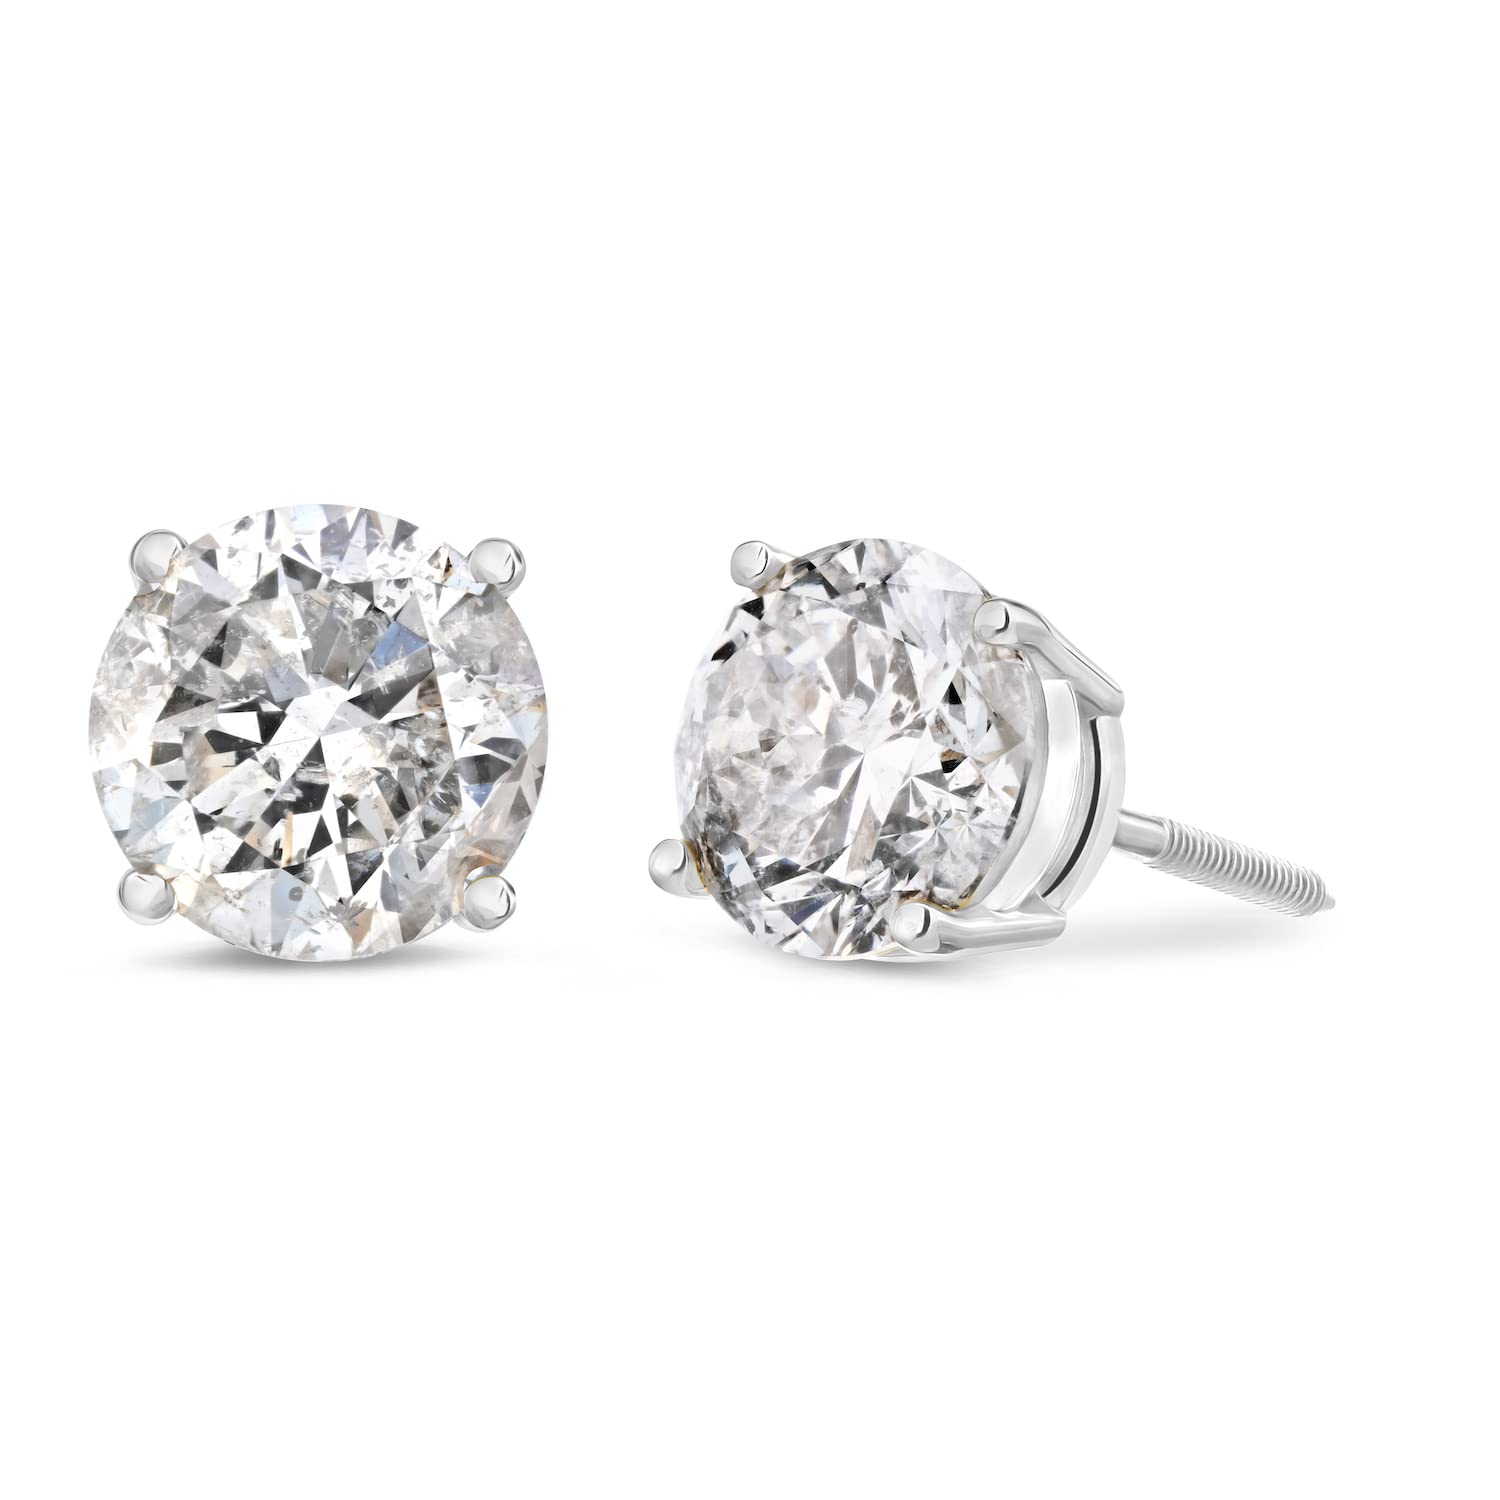 Amazon Collection Certified 14k White Gold Diamond with Screw Back and Post Stud Earrings (J-K Color, I1-I2 Clarity)